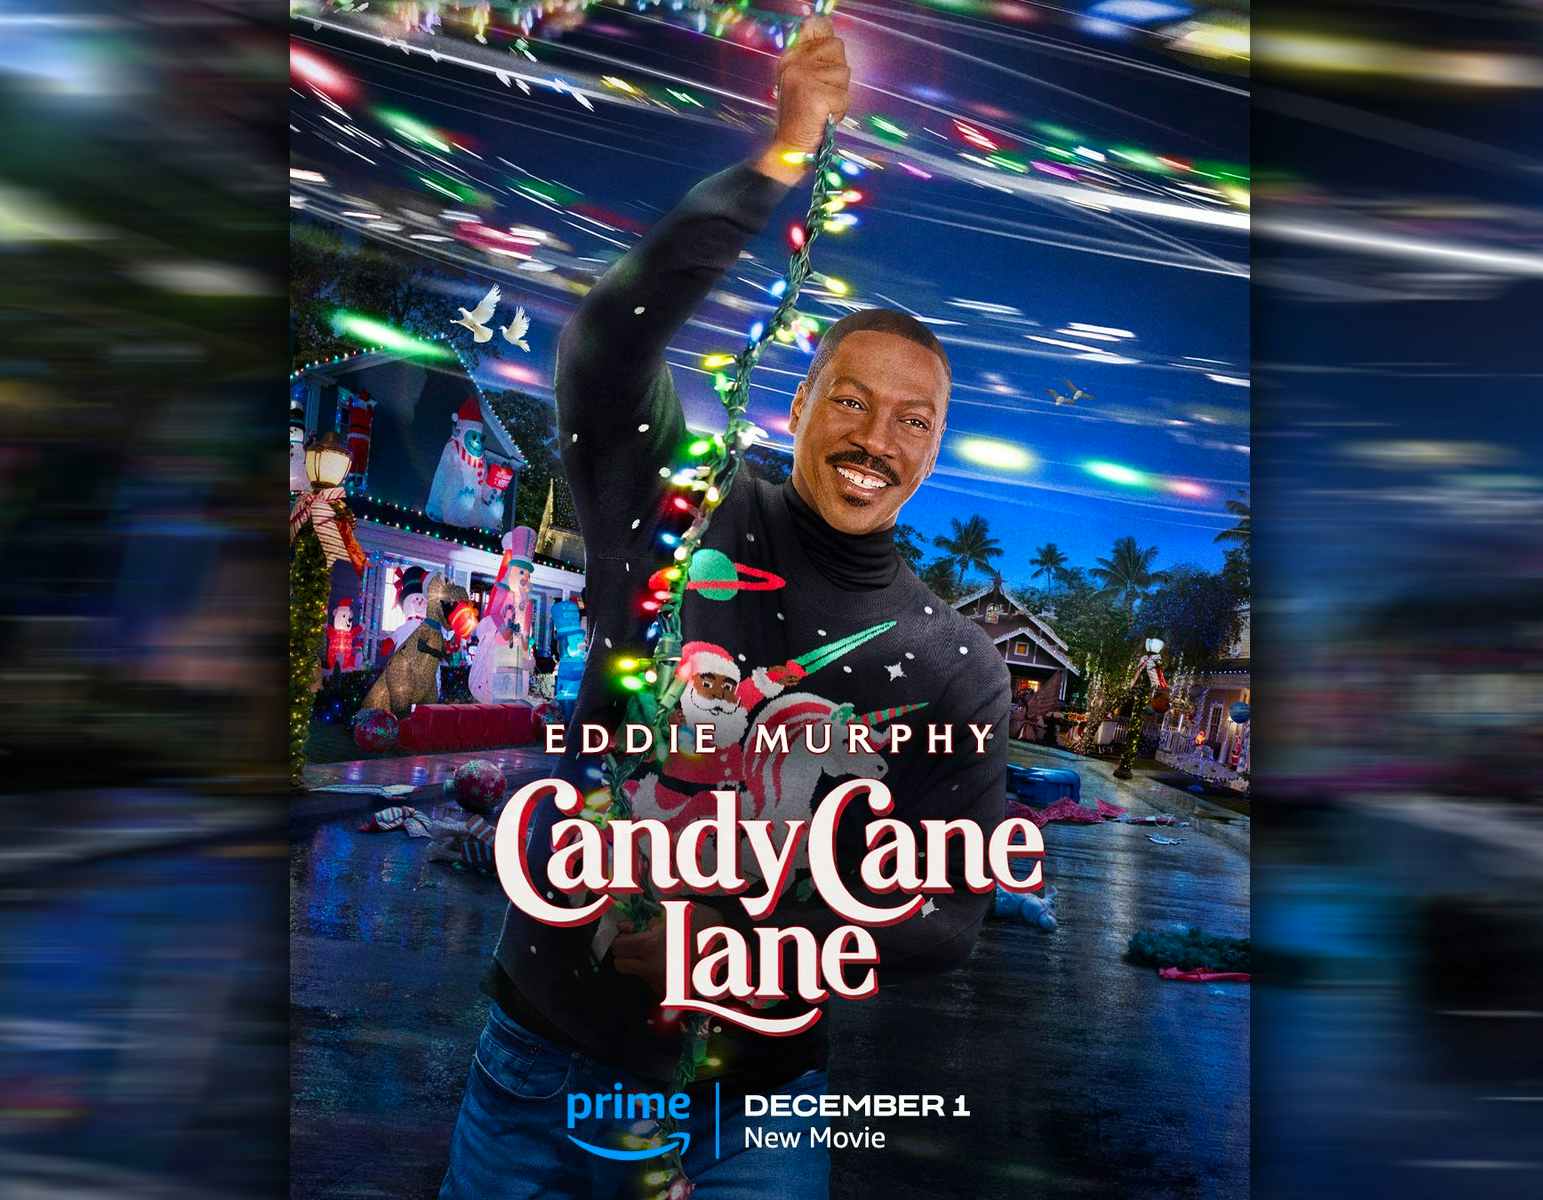 Poster for Eddie Murphy movie Candy Cane Lane, which will be in theaters as part of Amazon Prime Premiere